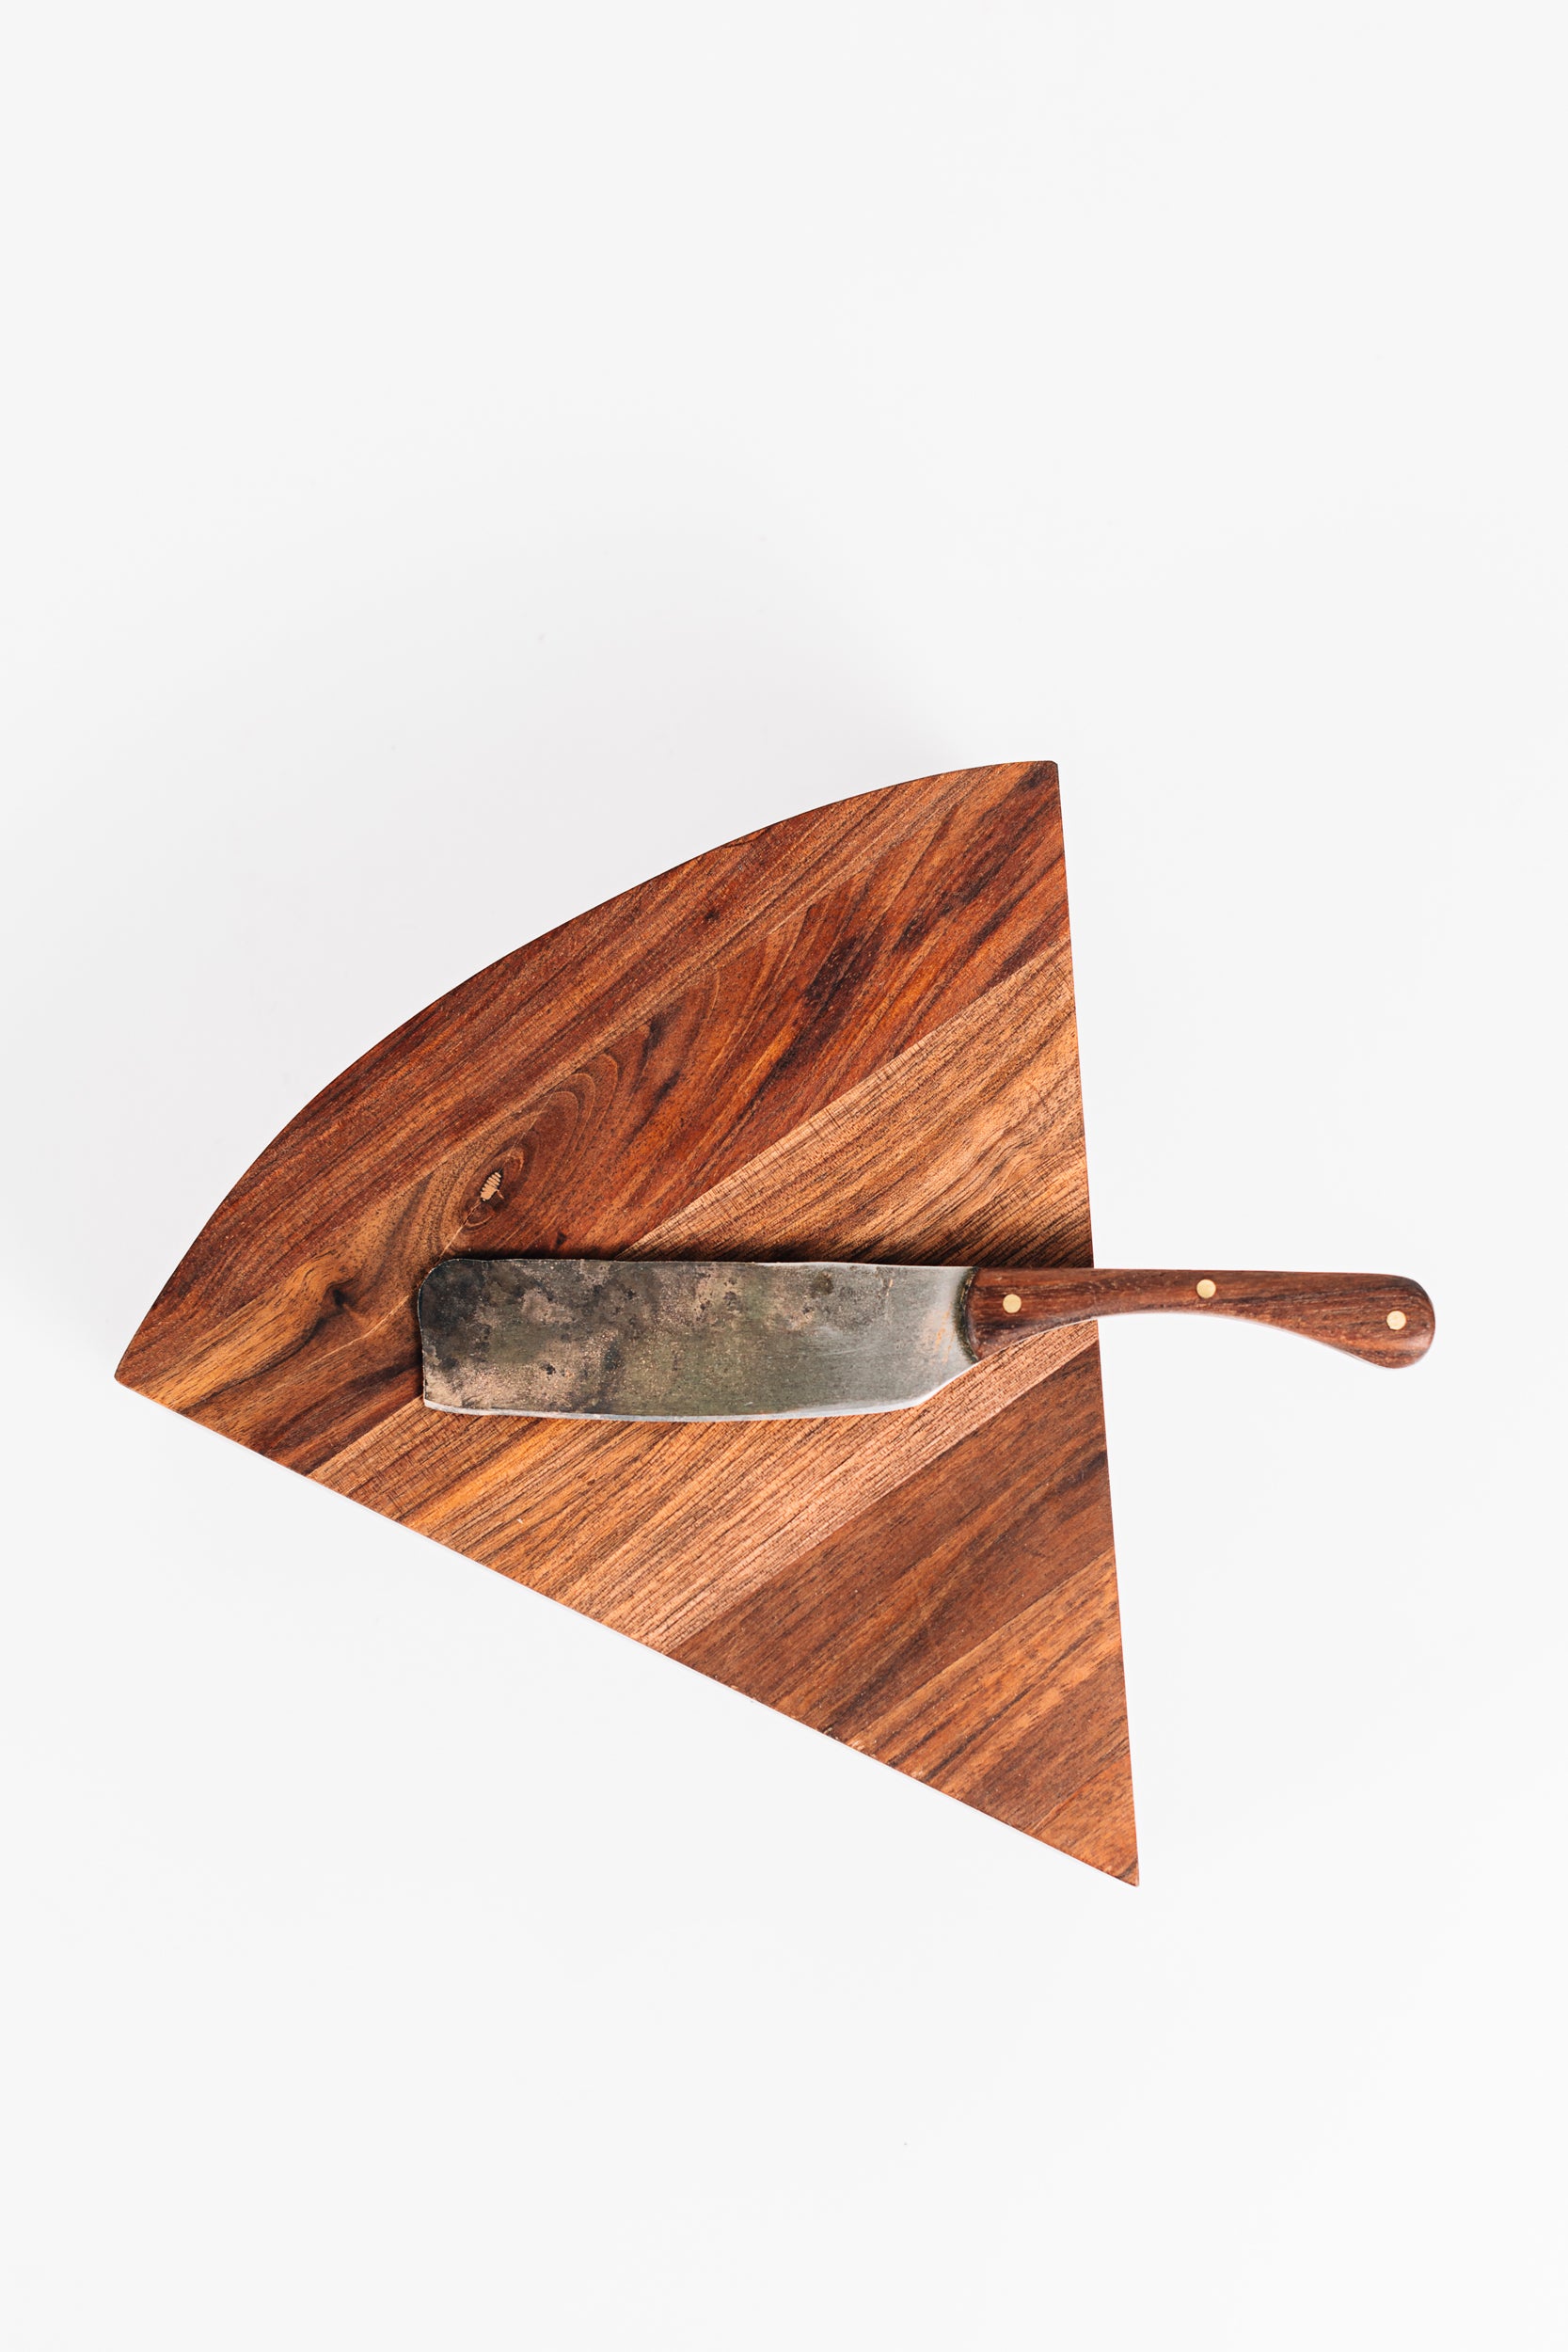 Walnut Cheese Block with Hand-Forged Knife